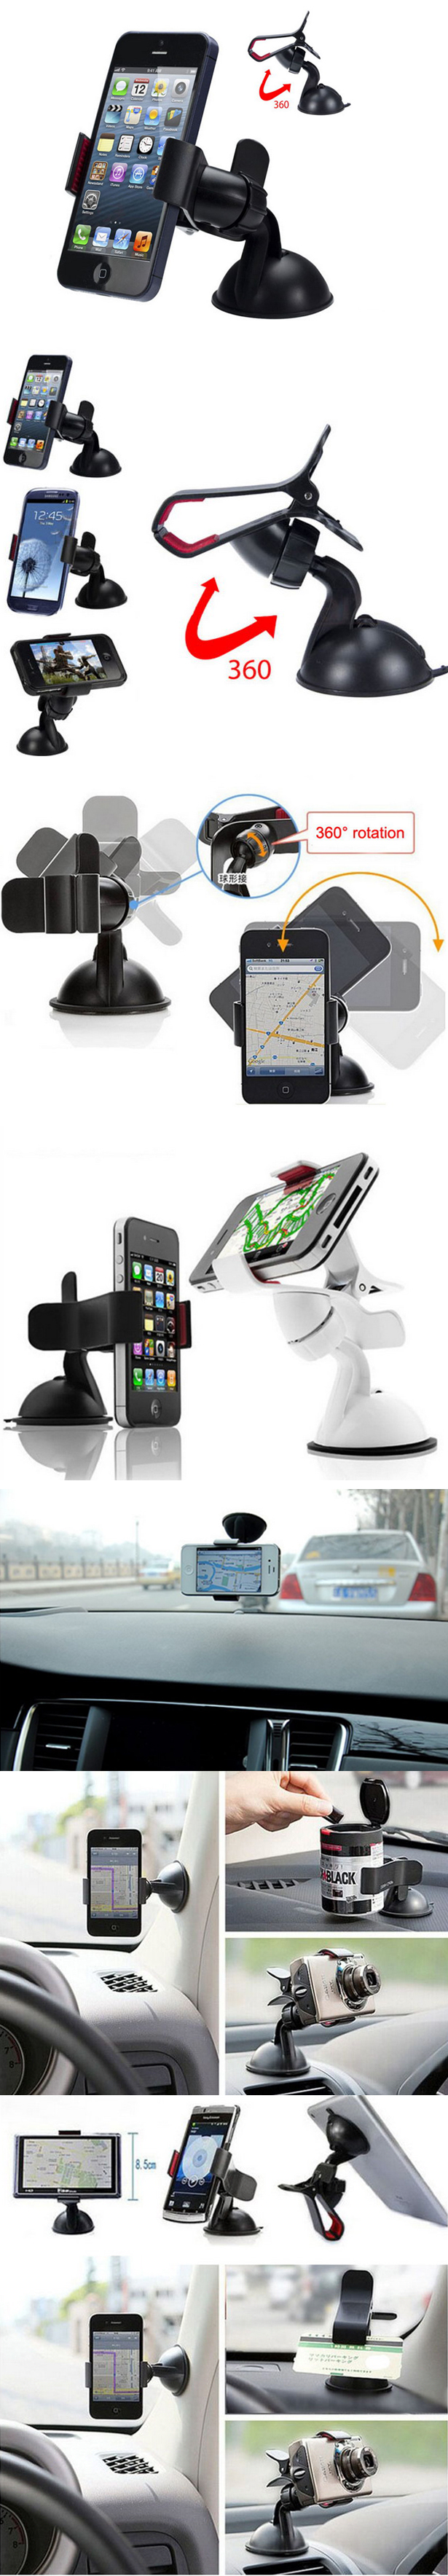 Universal 360 degree Car Windshield Mount Cell Mobile Phone Holder Bracket Stands for iPhone 5 6 Plus Galaxy Note 2 3 S4 S5 GPS